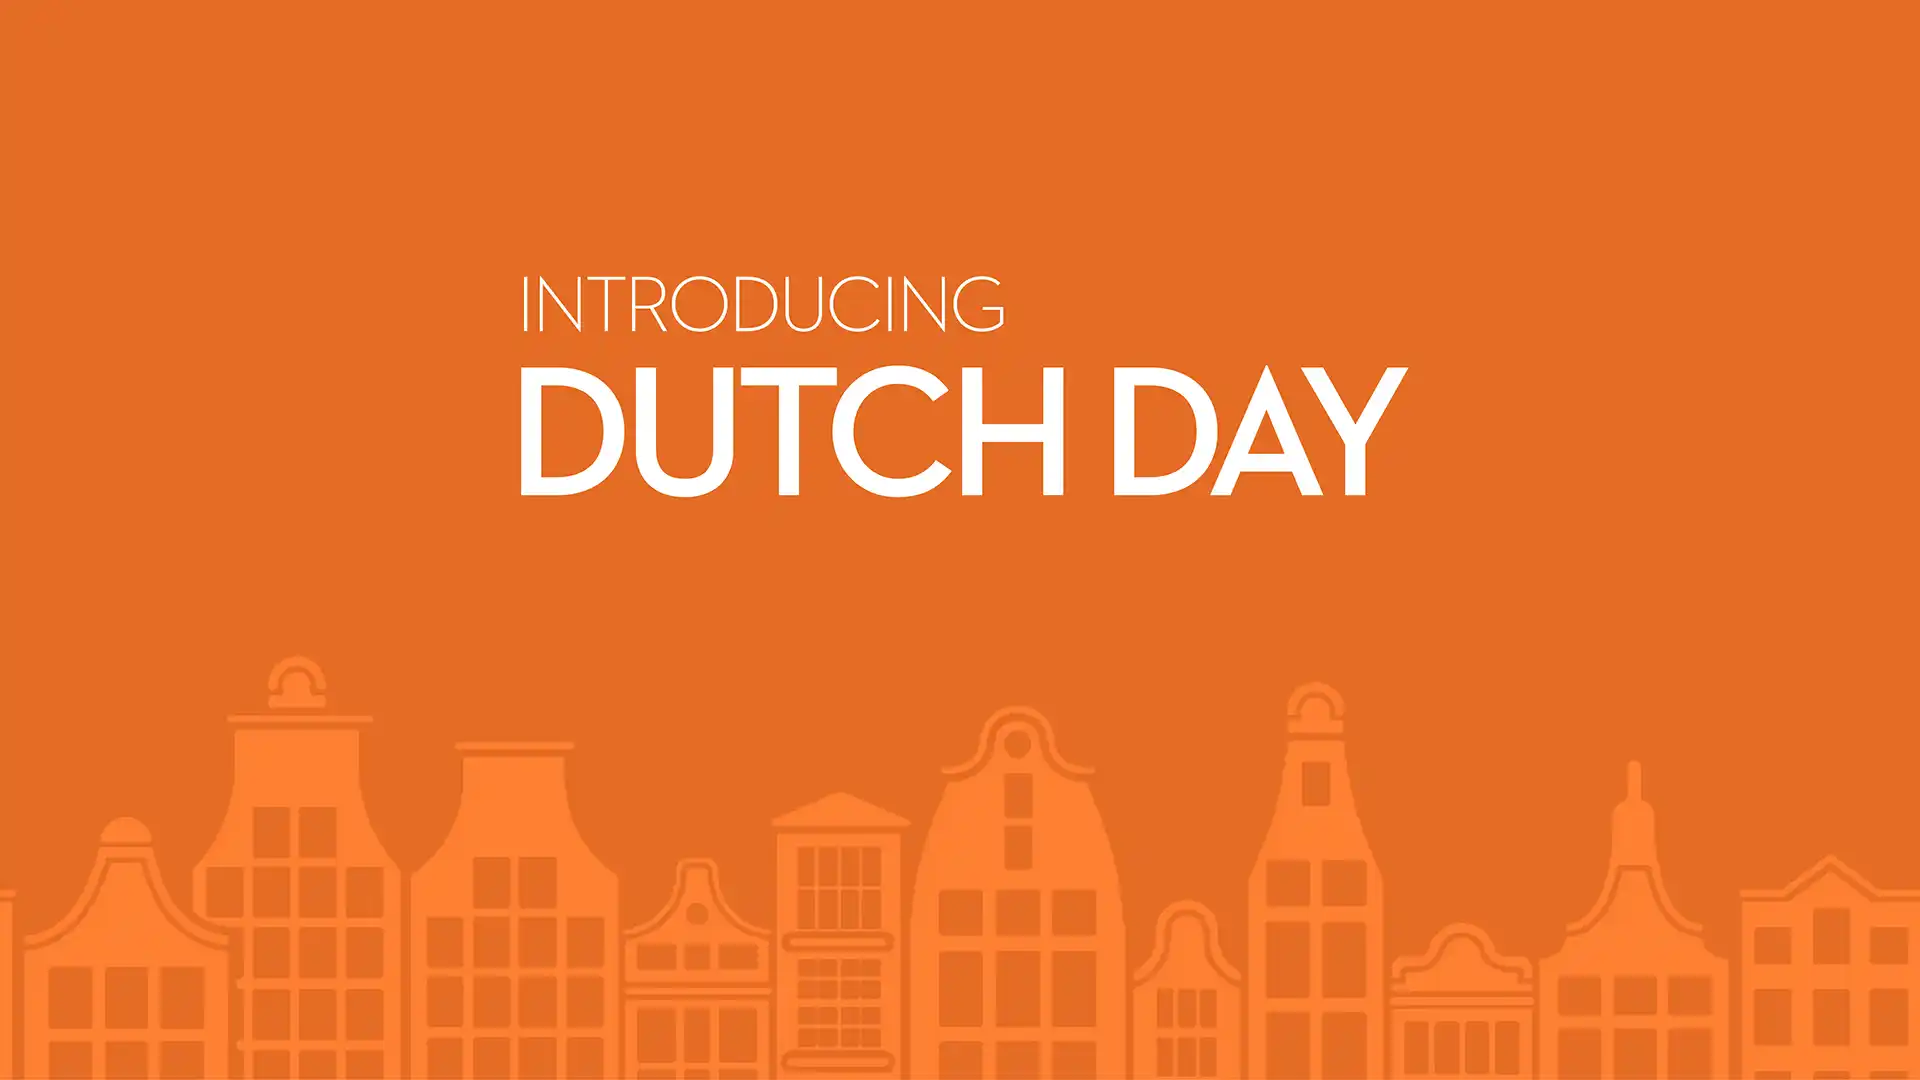 Celebrate Our Heritage Through Dutch Day On Board